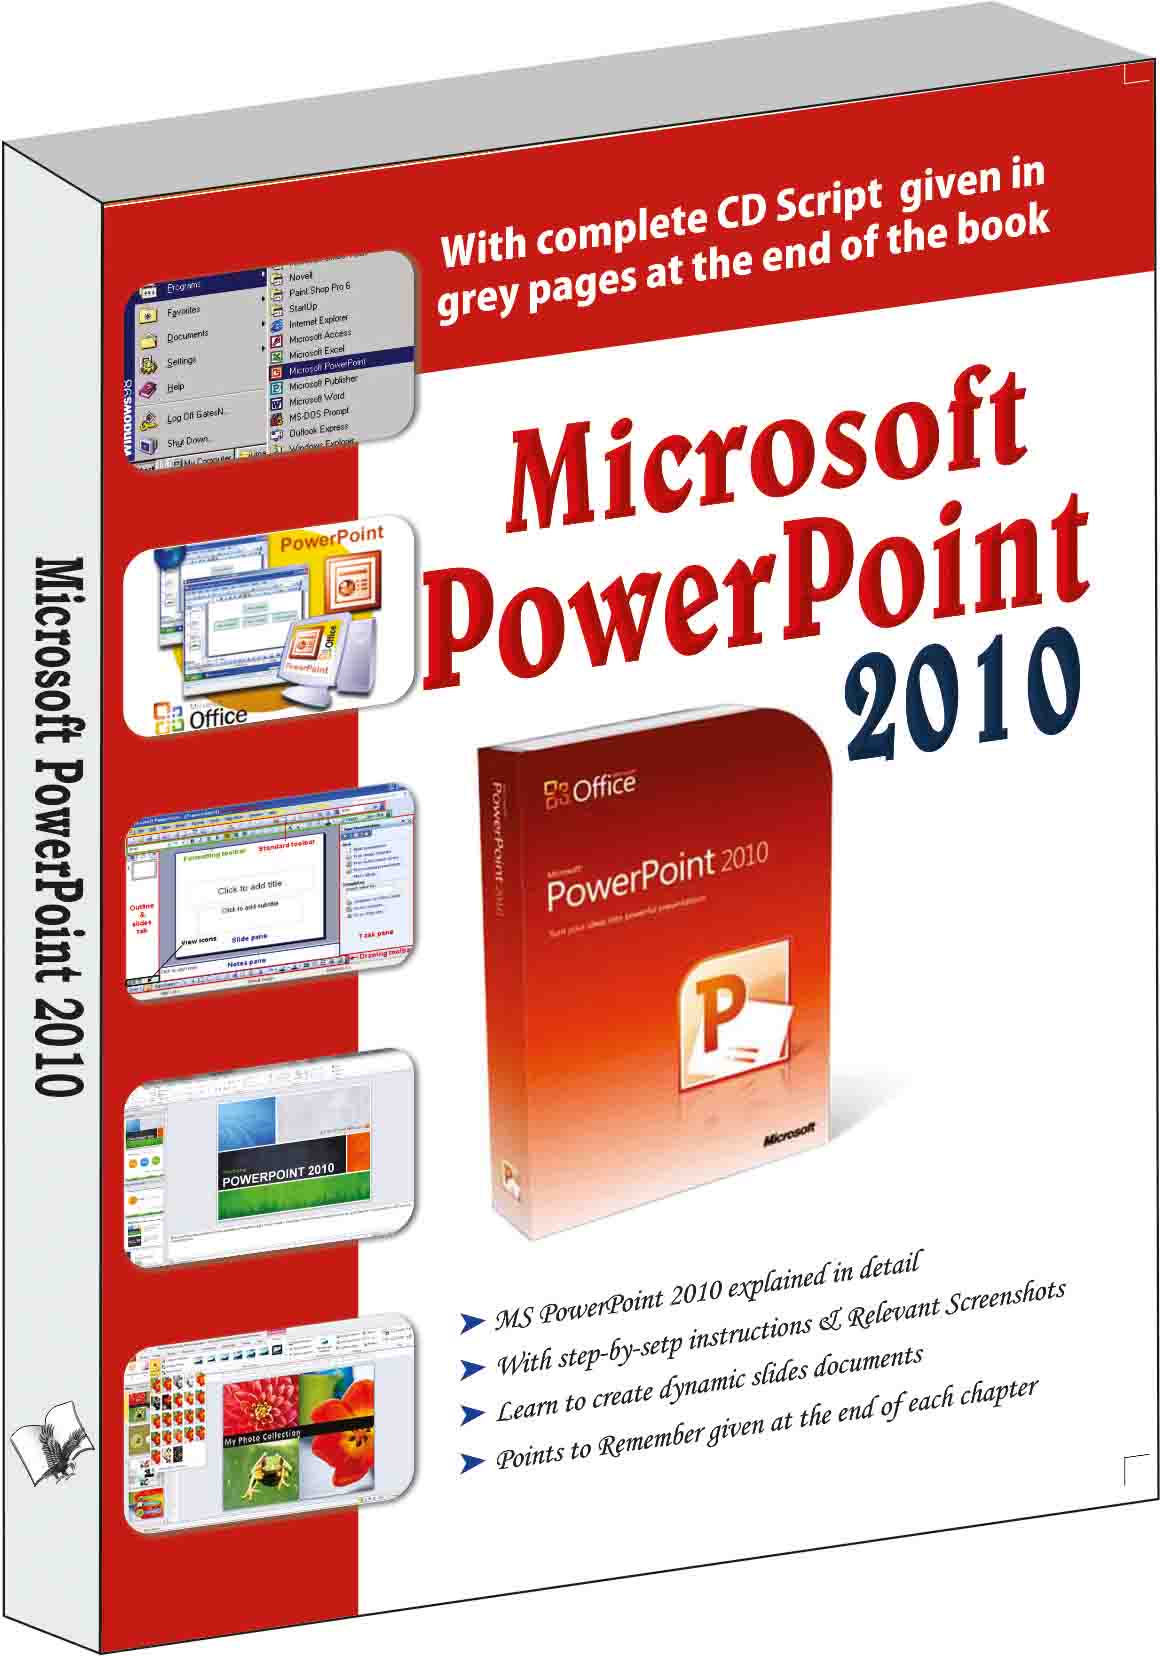 Microsoft Powerpoint 2010-Develop computer skills: be future ready